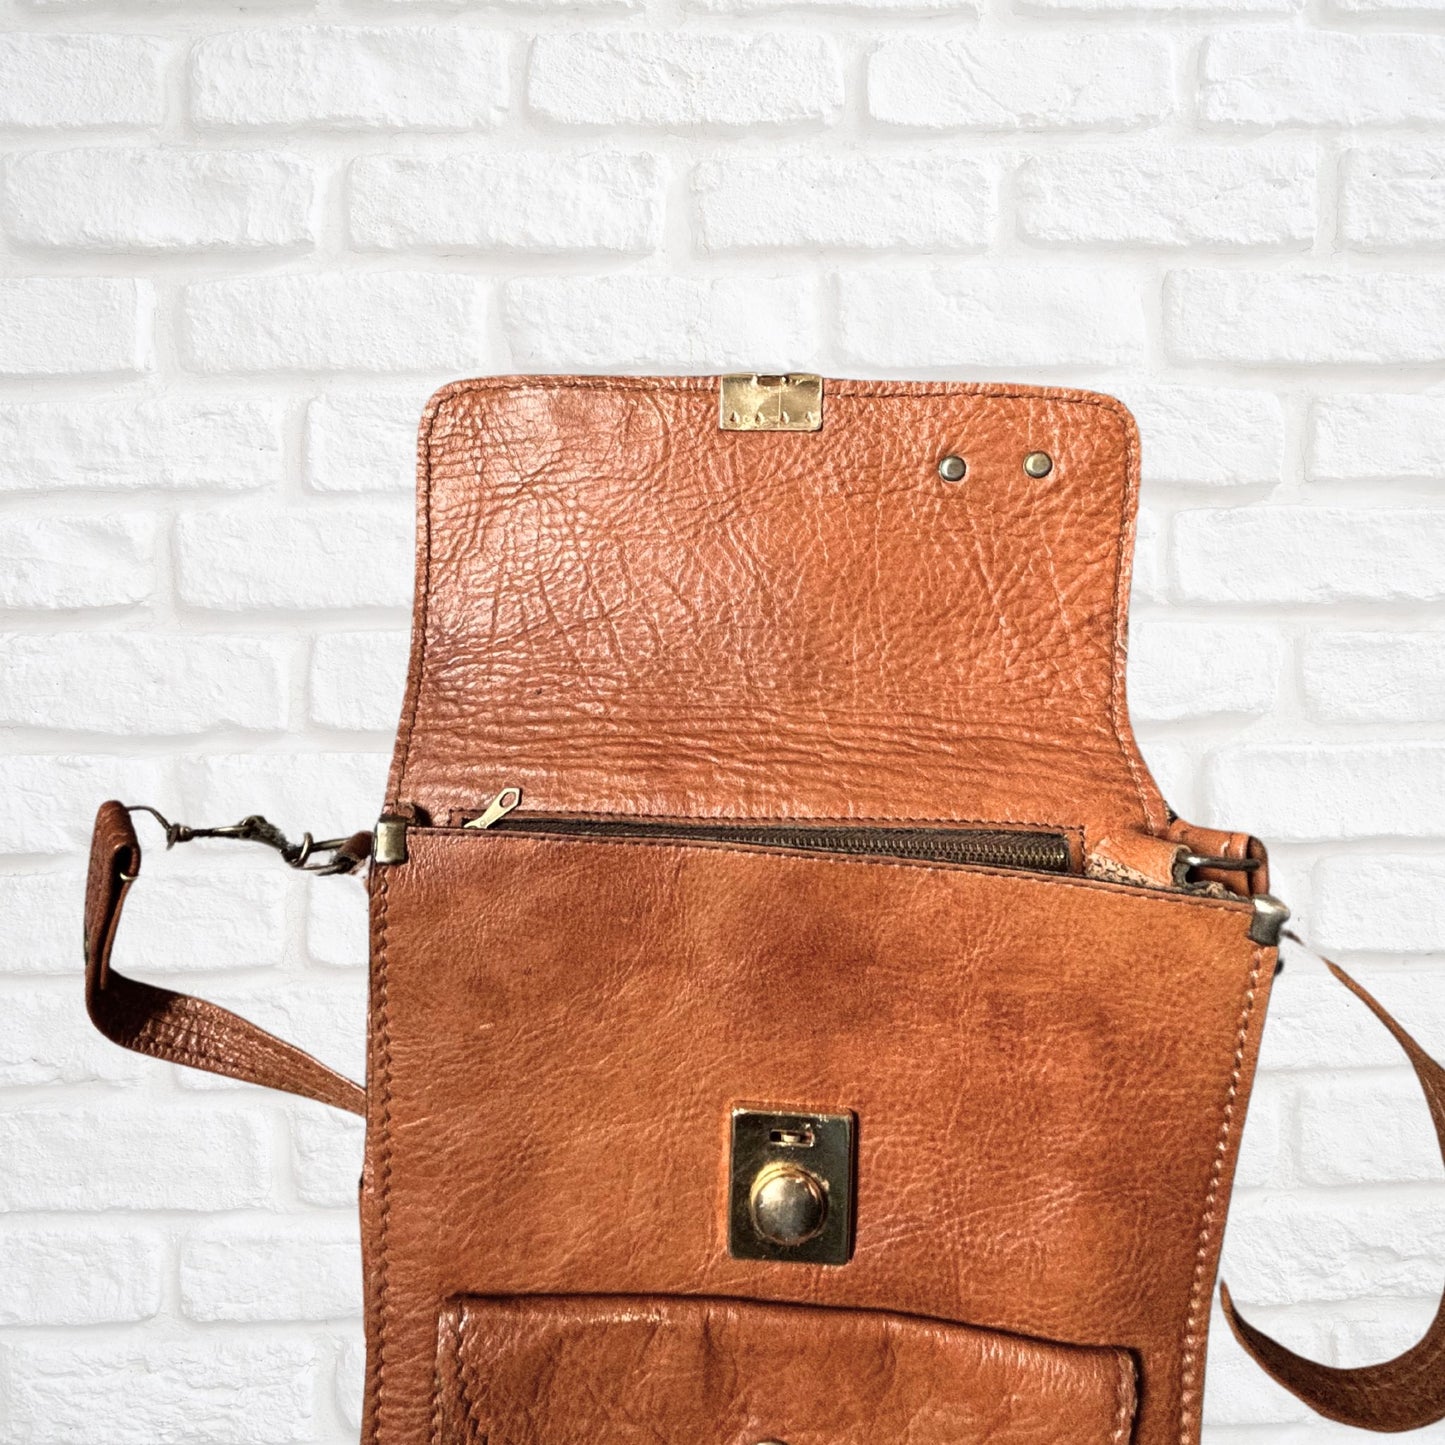 Vintage 70s Brown Leather Shoulder Bag with multiple compartments - Practical and Stylish Unisex Travel Companion